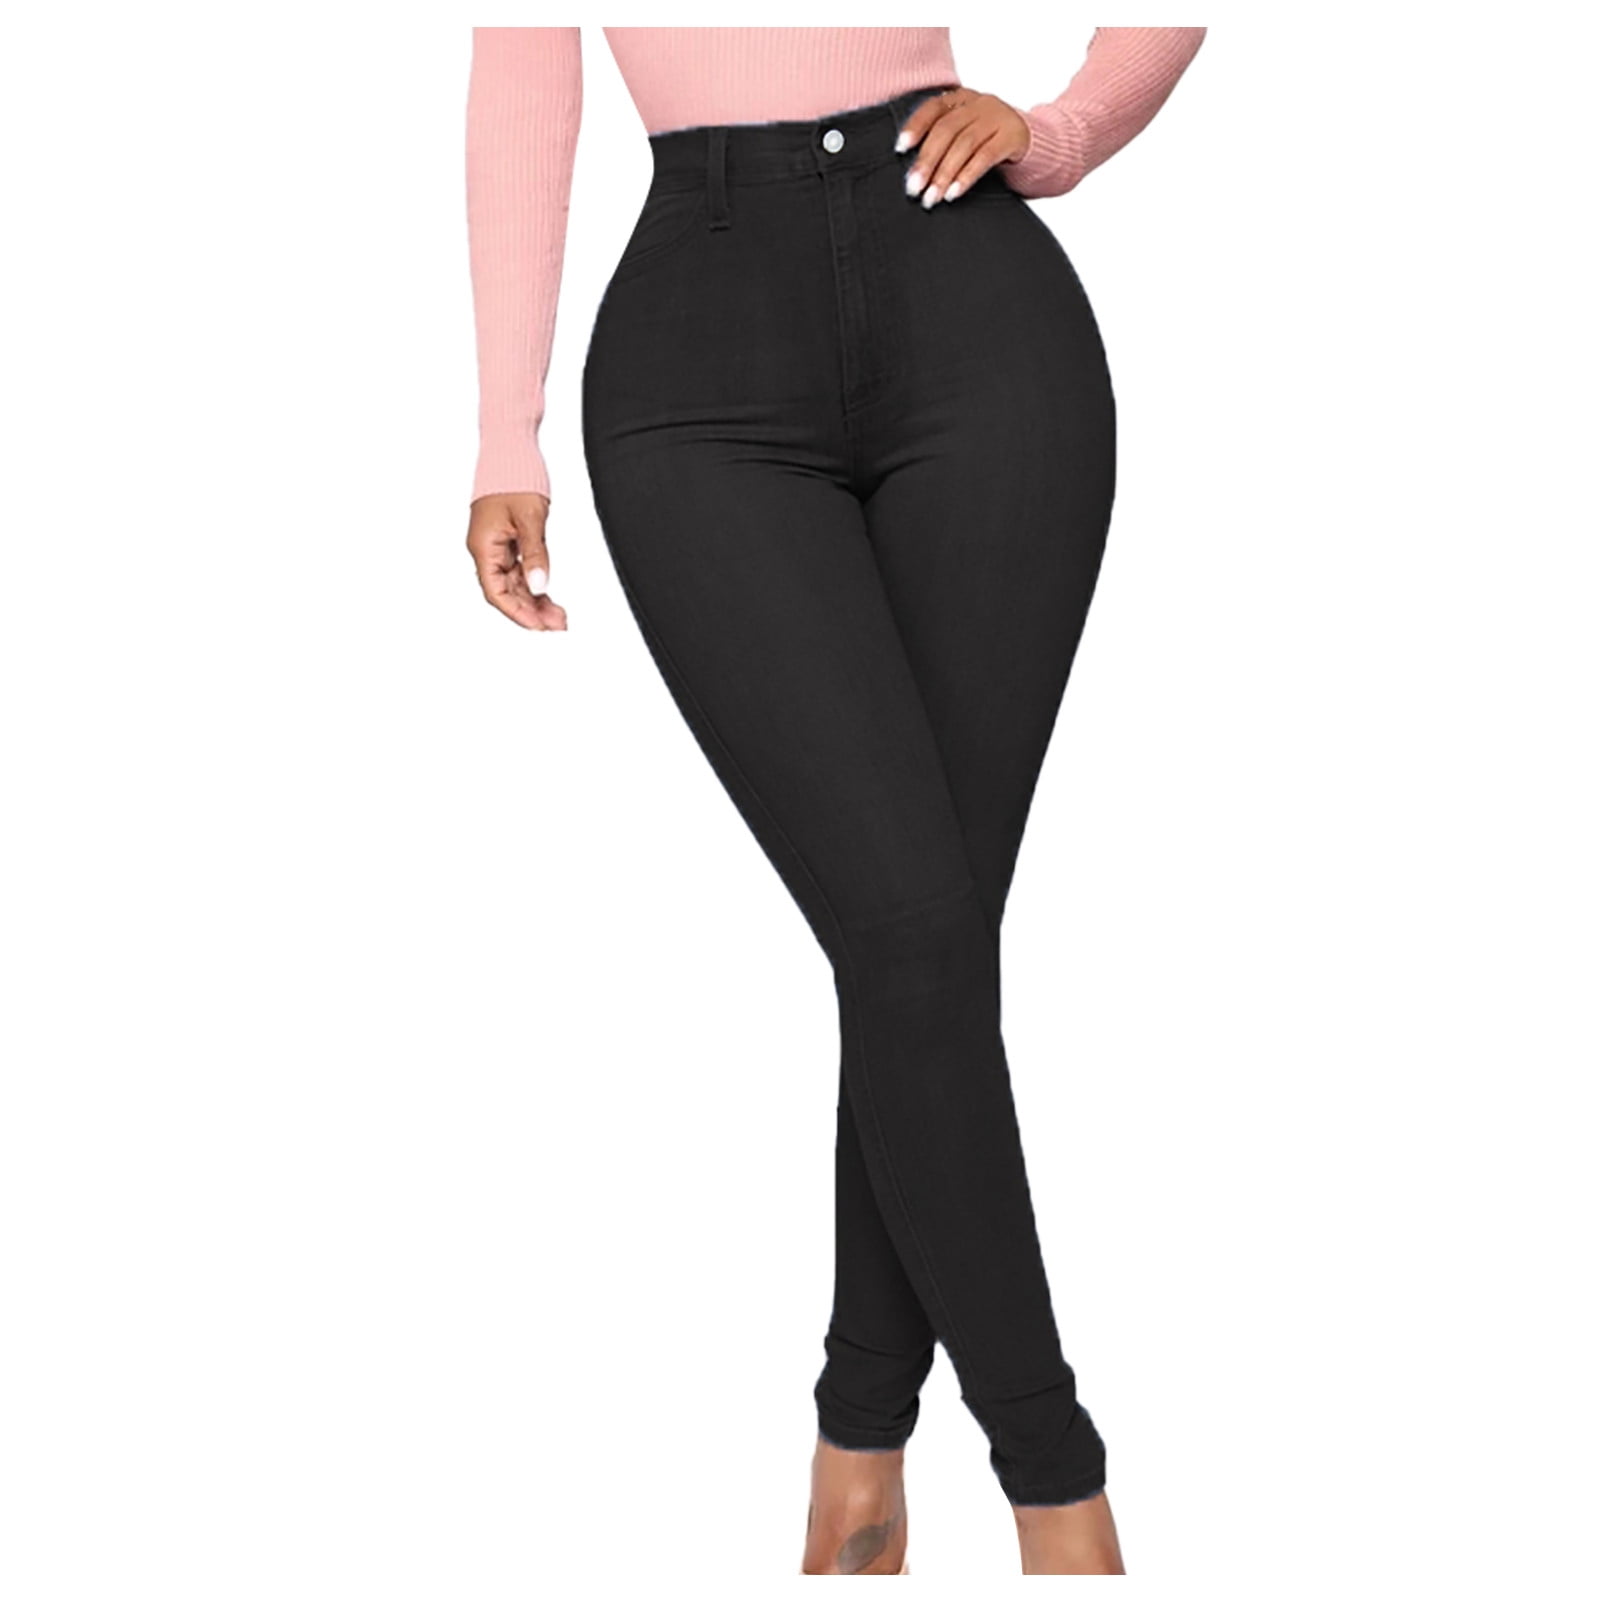 MRULIC jeans for women Ladies Pants Ripped Pants Plus Size Washed Women's  Jeans Trousers Black + L